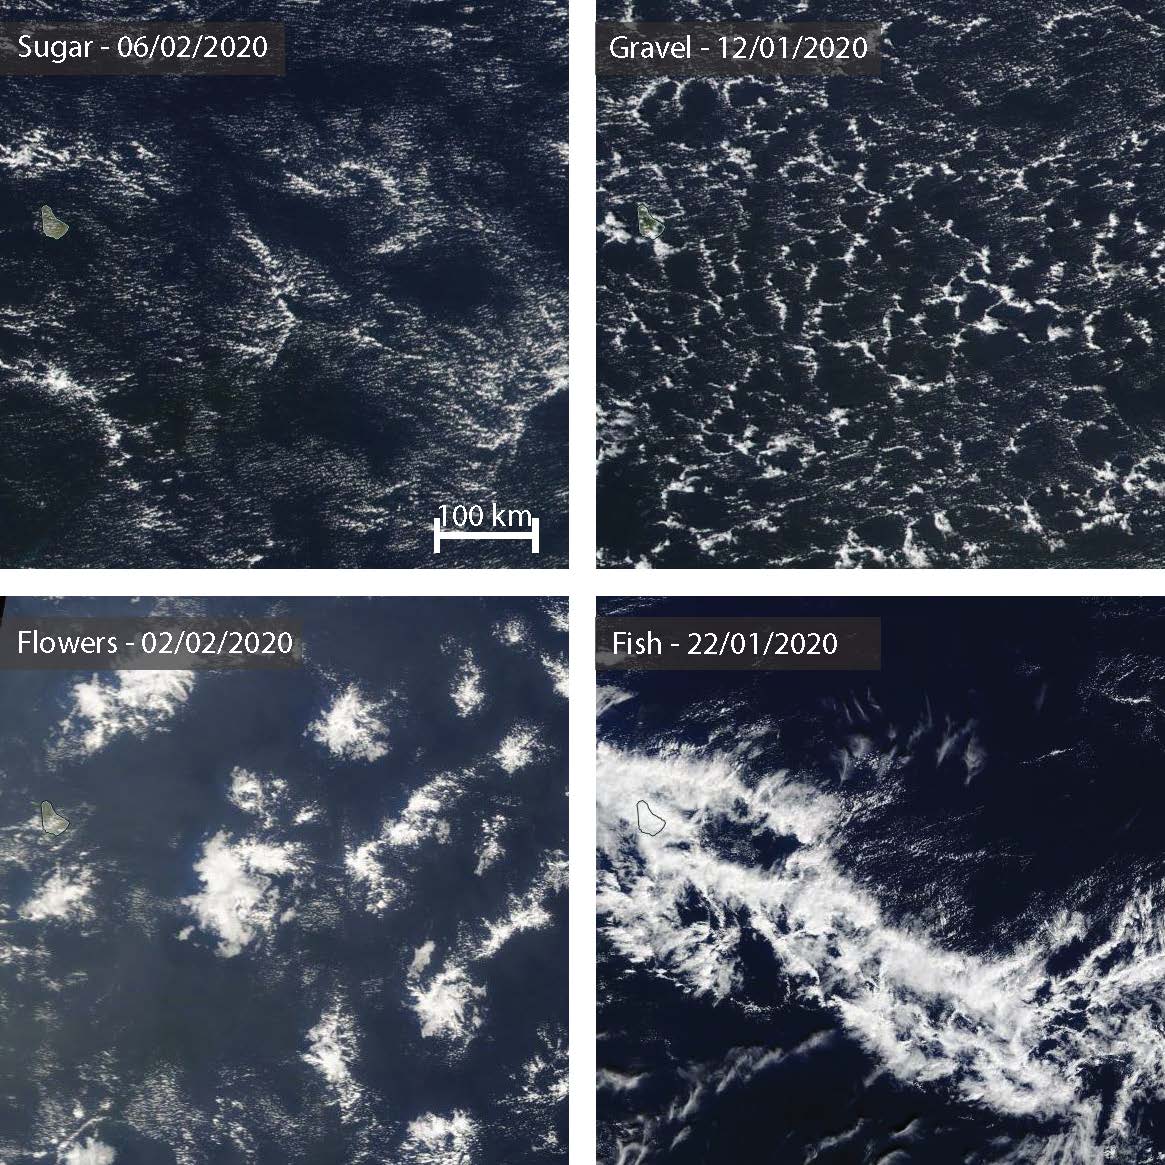 Meso-scale cloud patterns